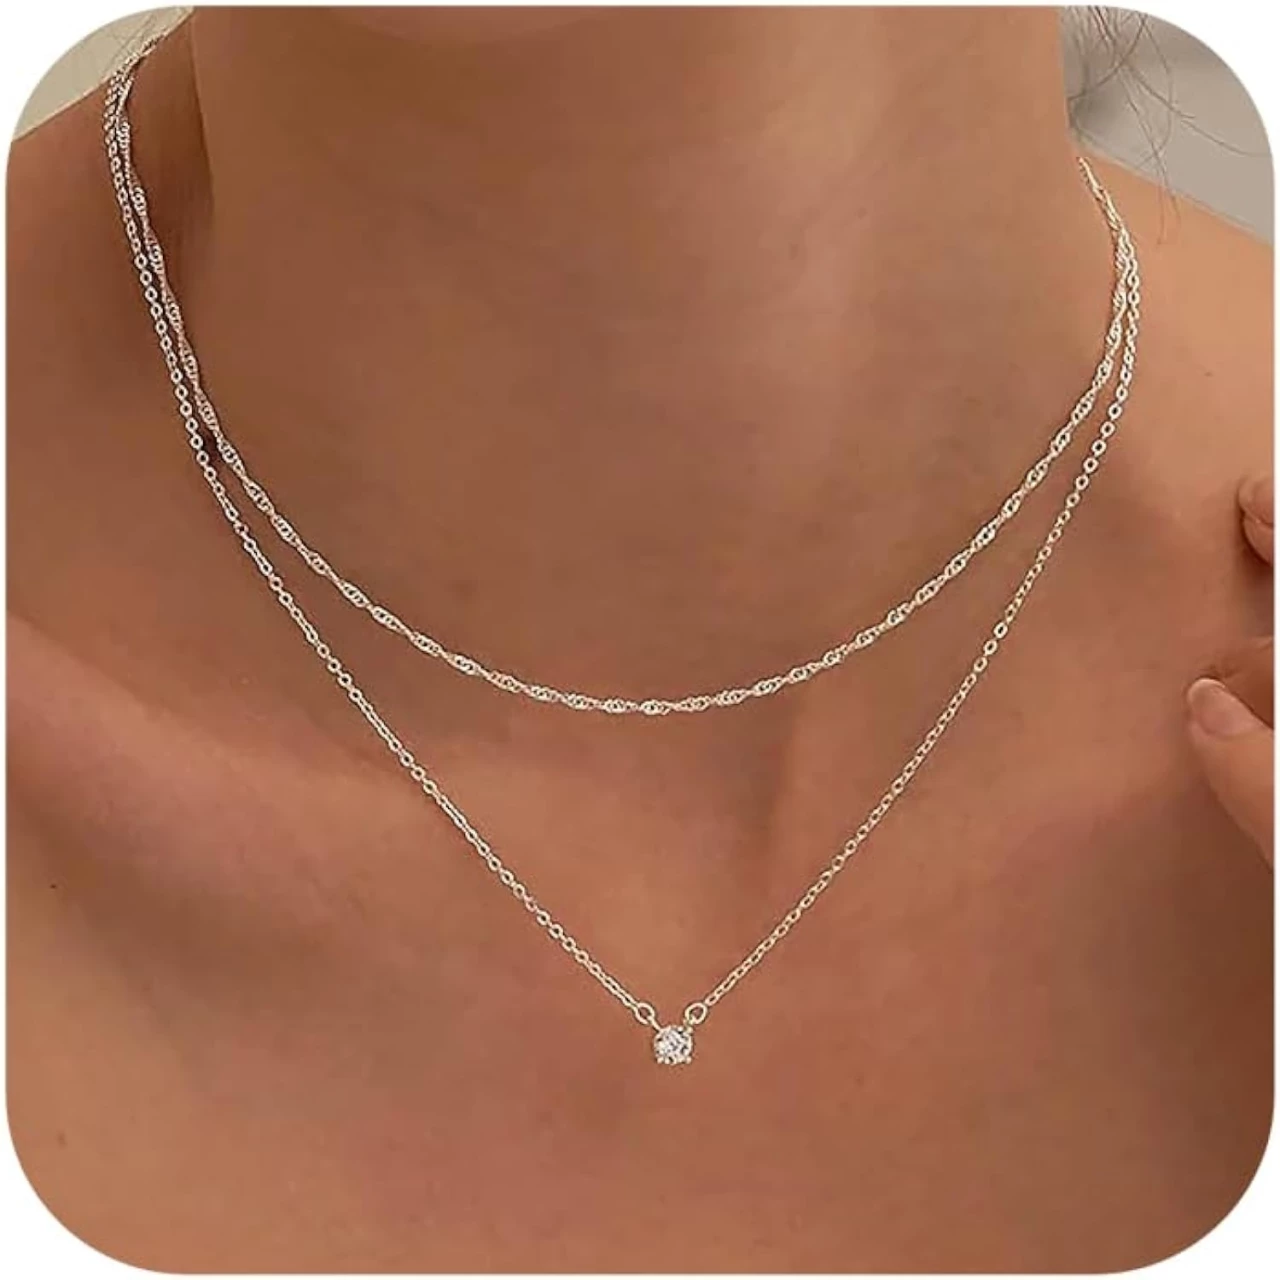 Tewiky Diamond Necklaces for Women, Dainty Gold Necklace 14k Gold Plated Long Lariat Necklace Simple Gold CZ Diamond Choker Necklaces for Women Trendy Gold Necklace Jewelry Gifts for Girls